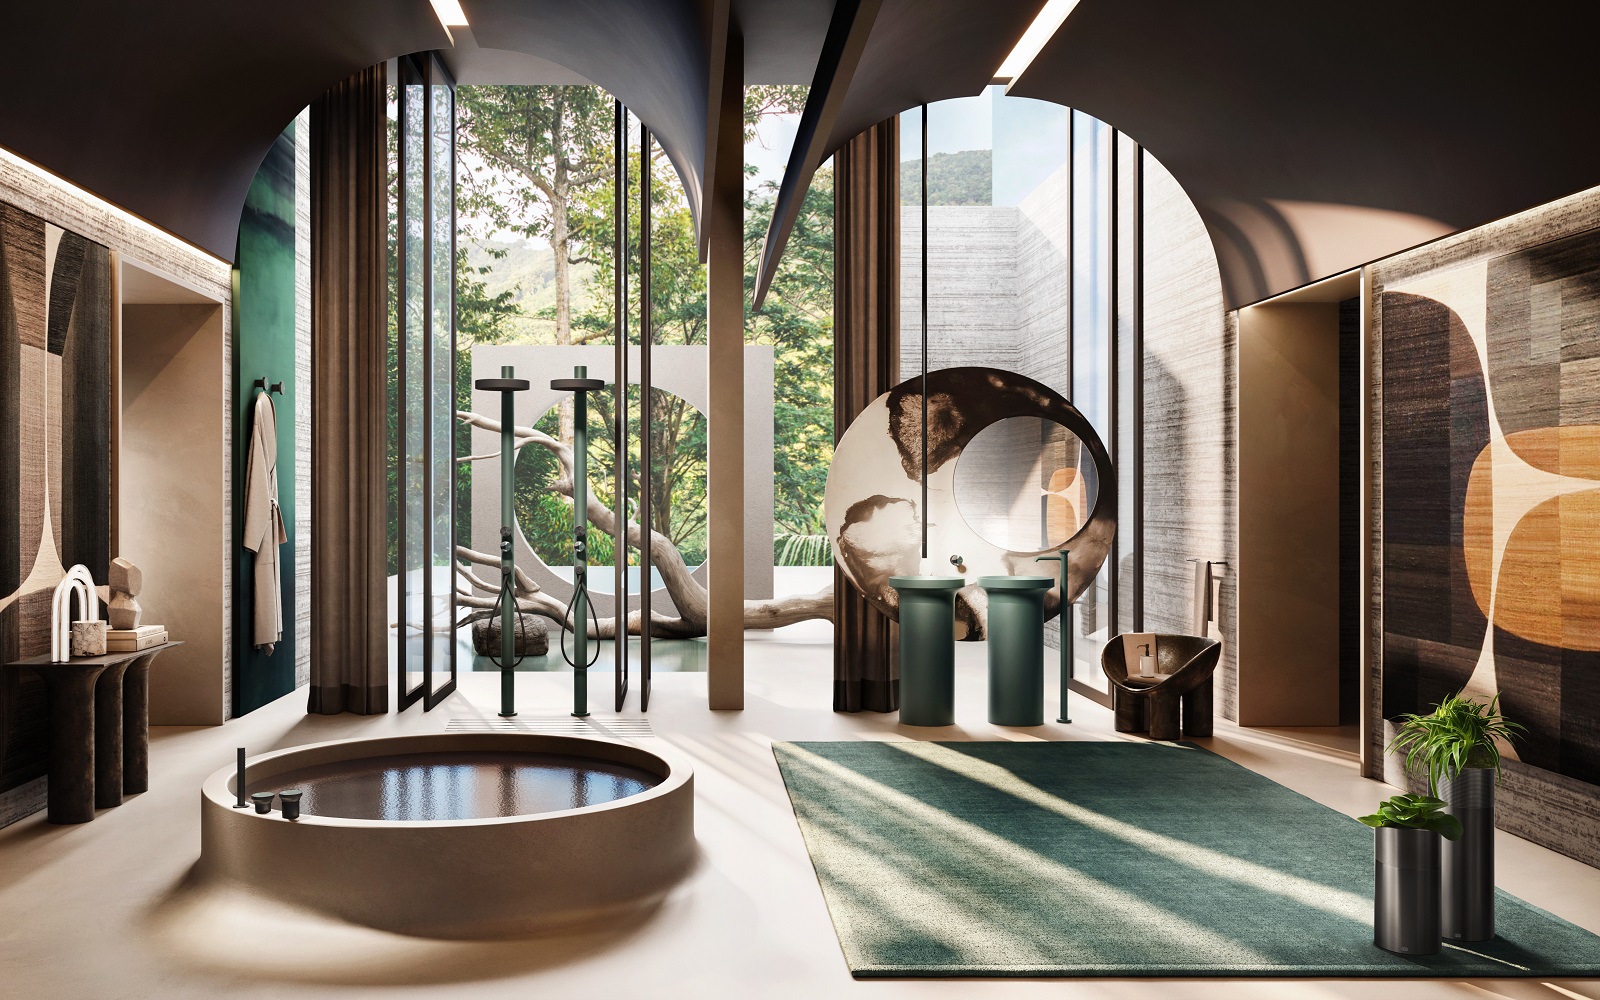 bathroom with arched windows and a round pool bath with fittings from the Origini collection from Gessi